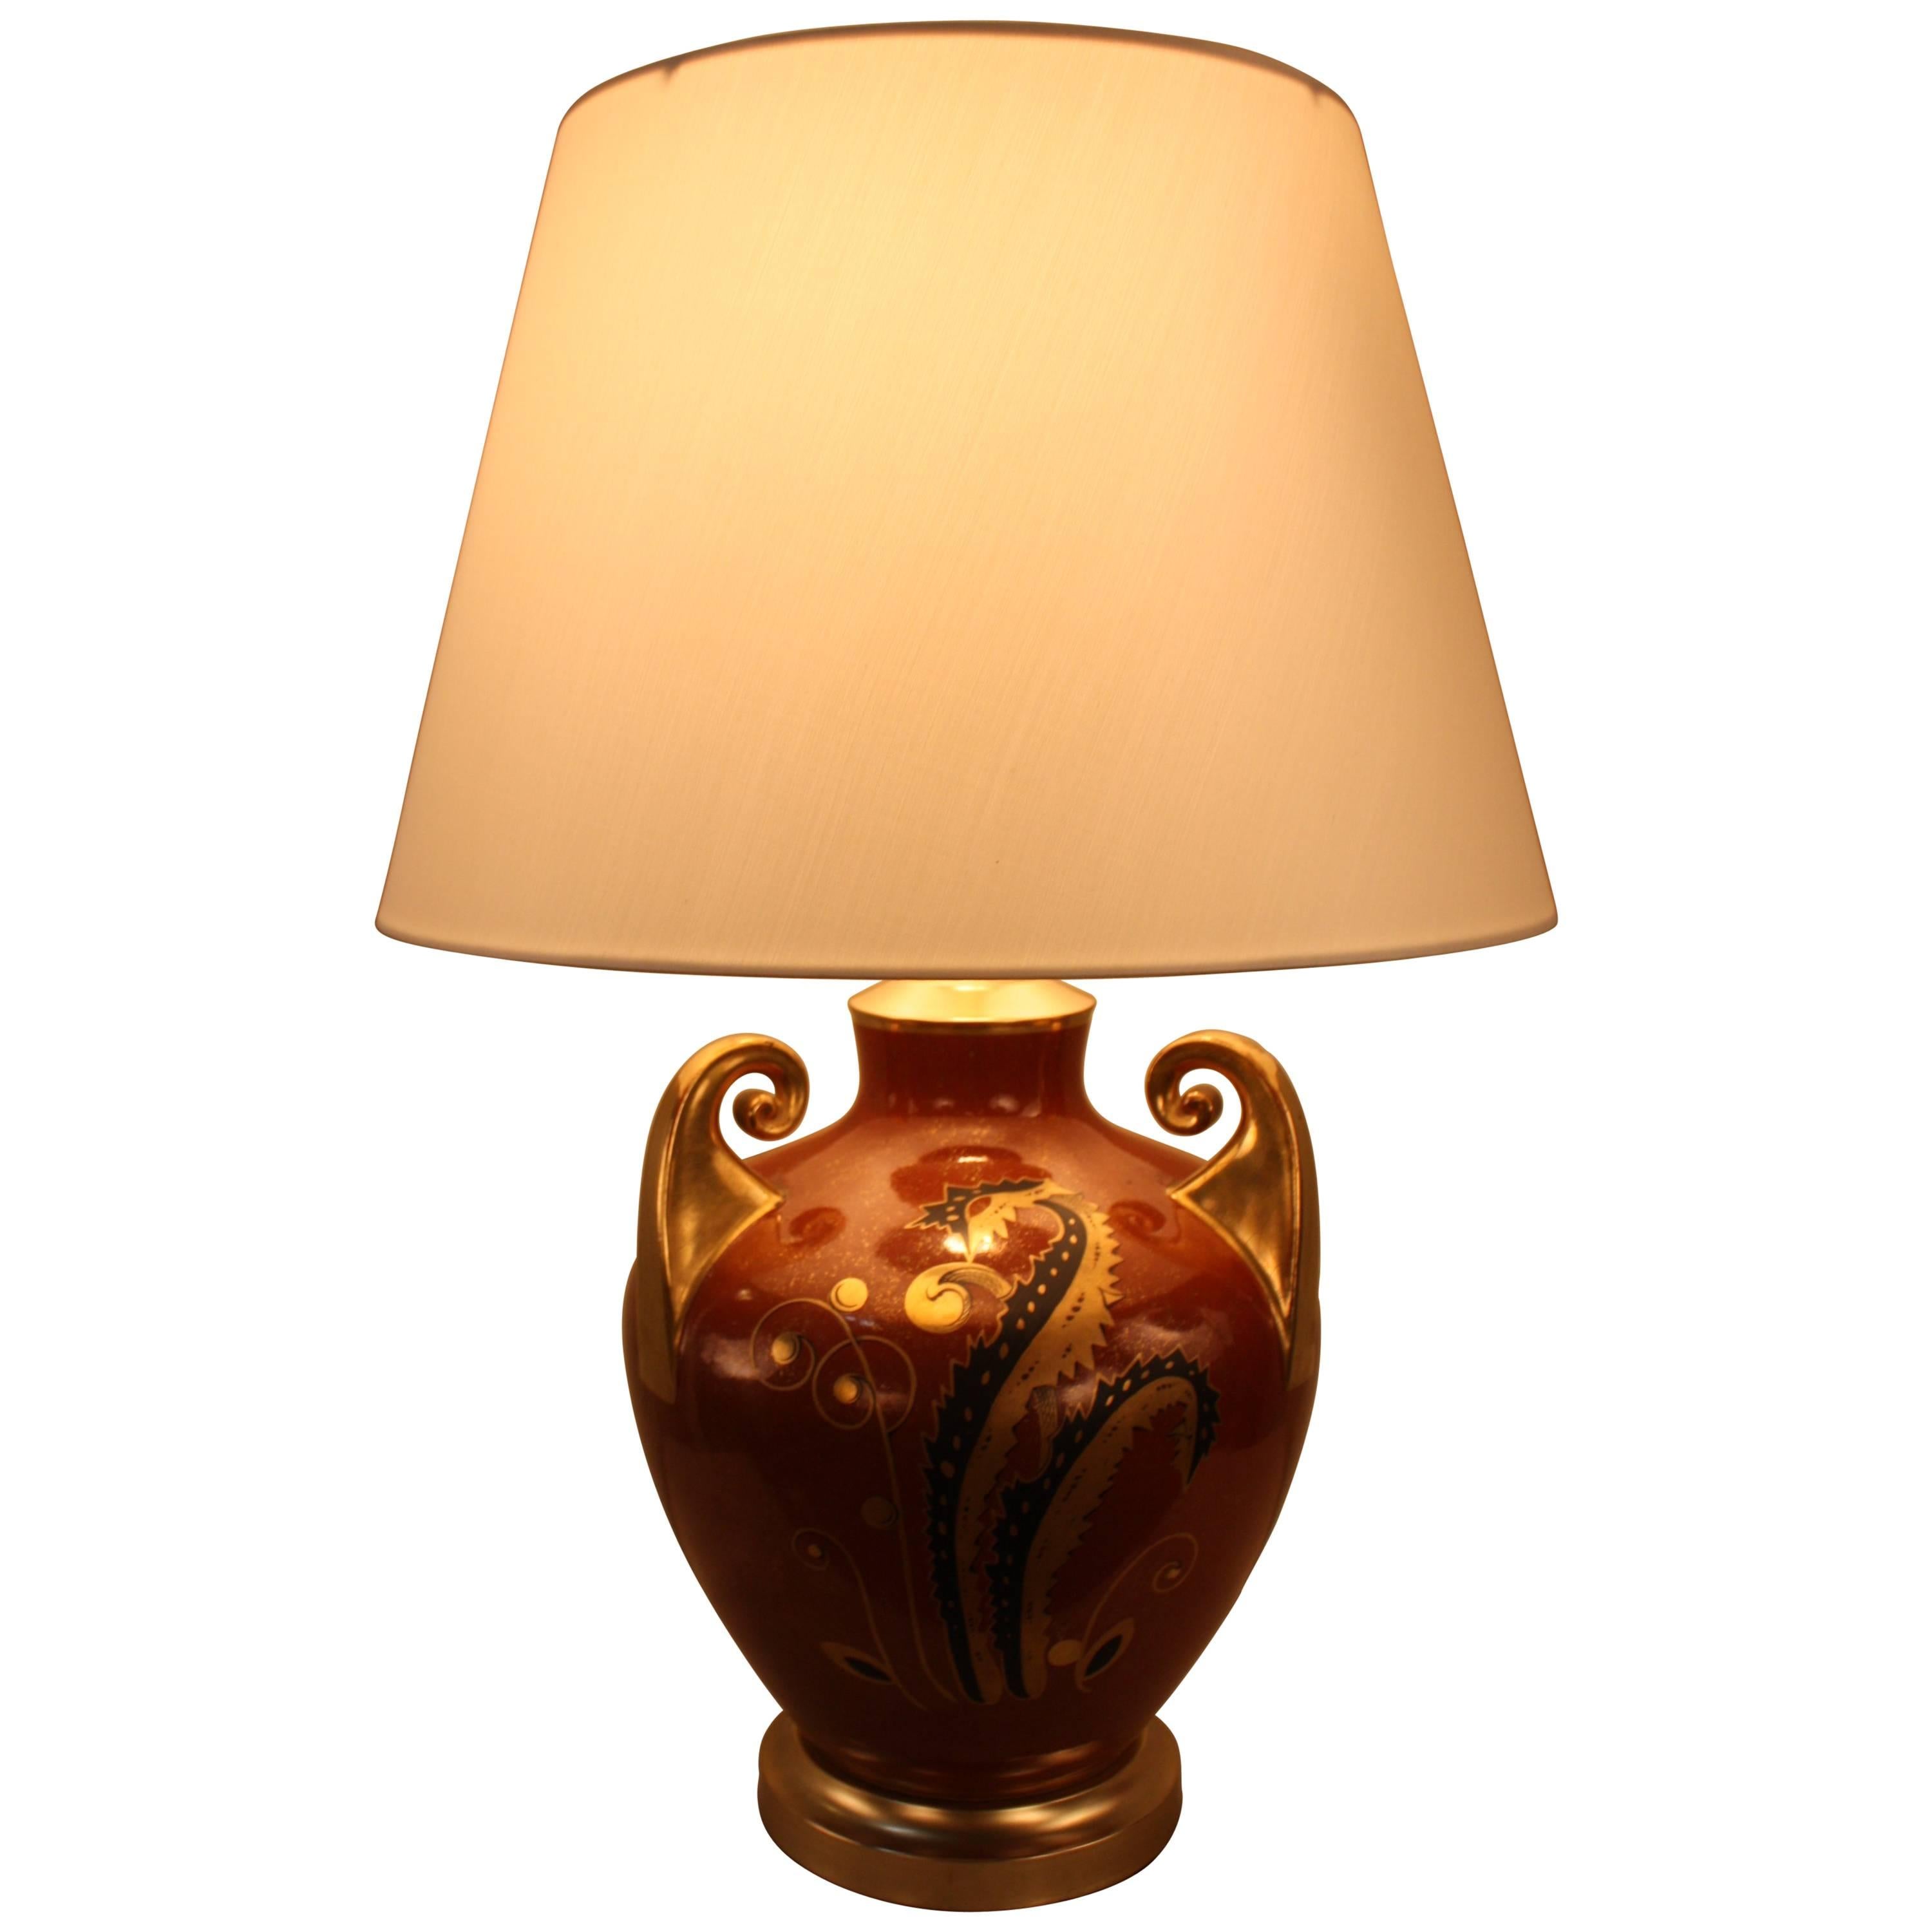 French 1930s Porcelain Table Lamp